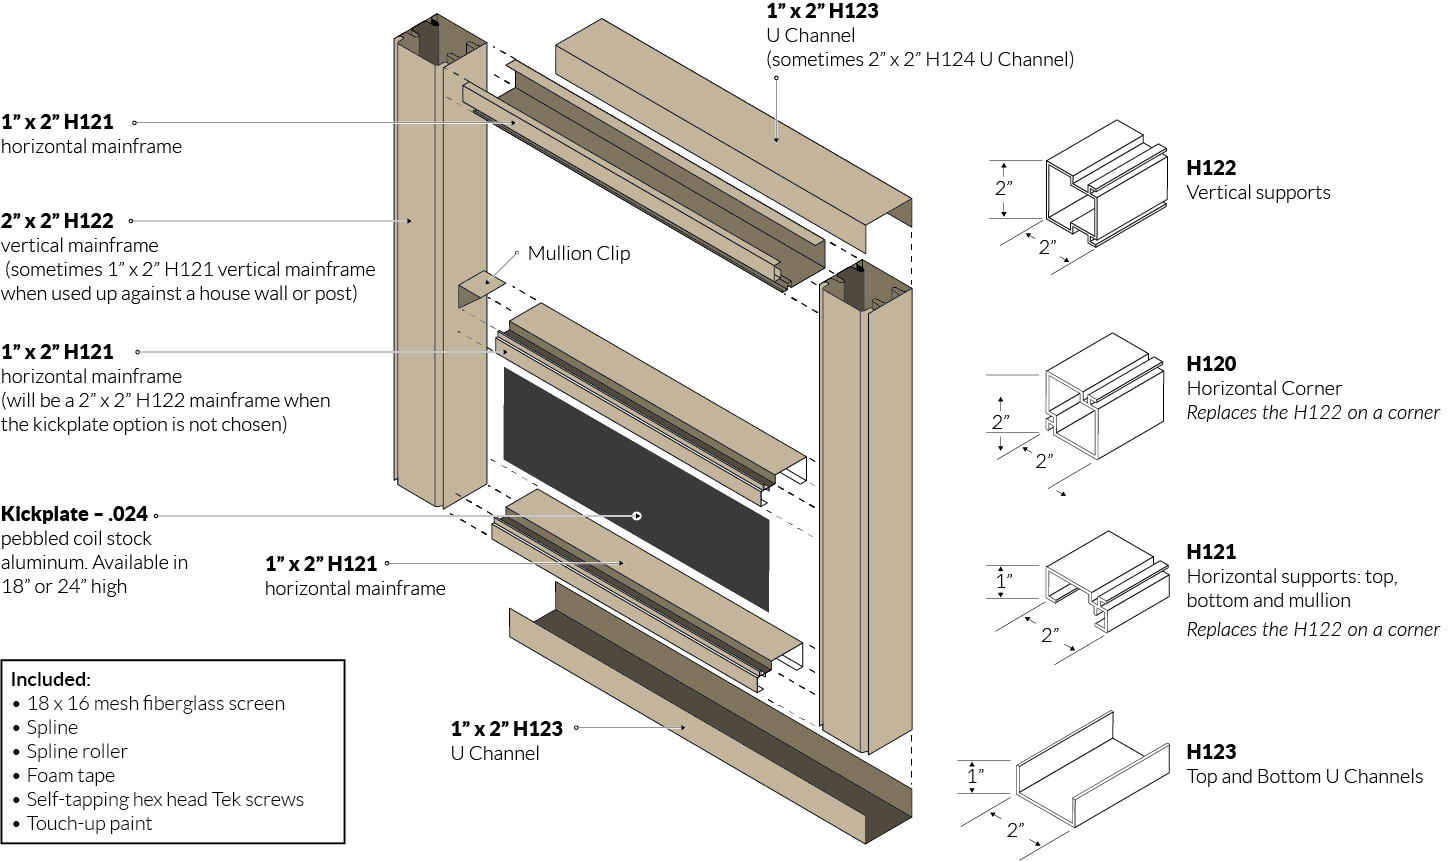 Exploded view of the screen walls installation